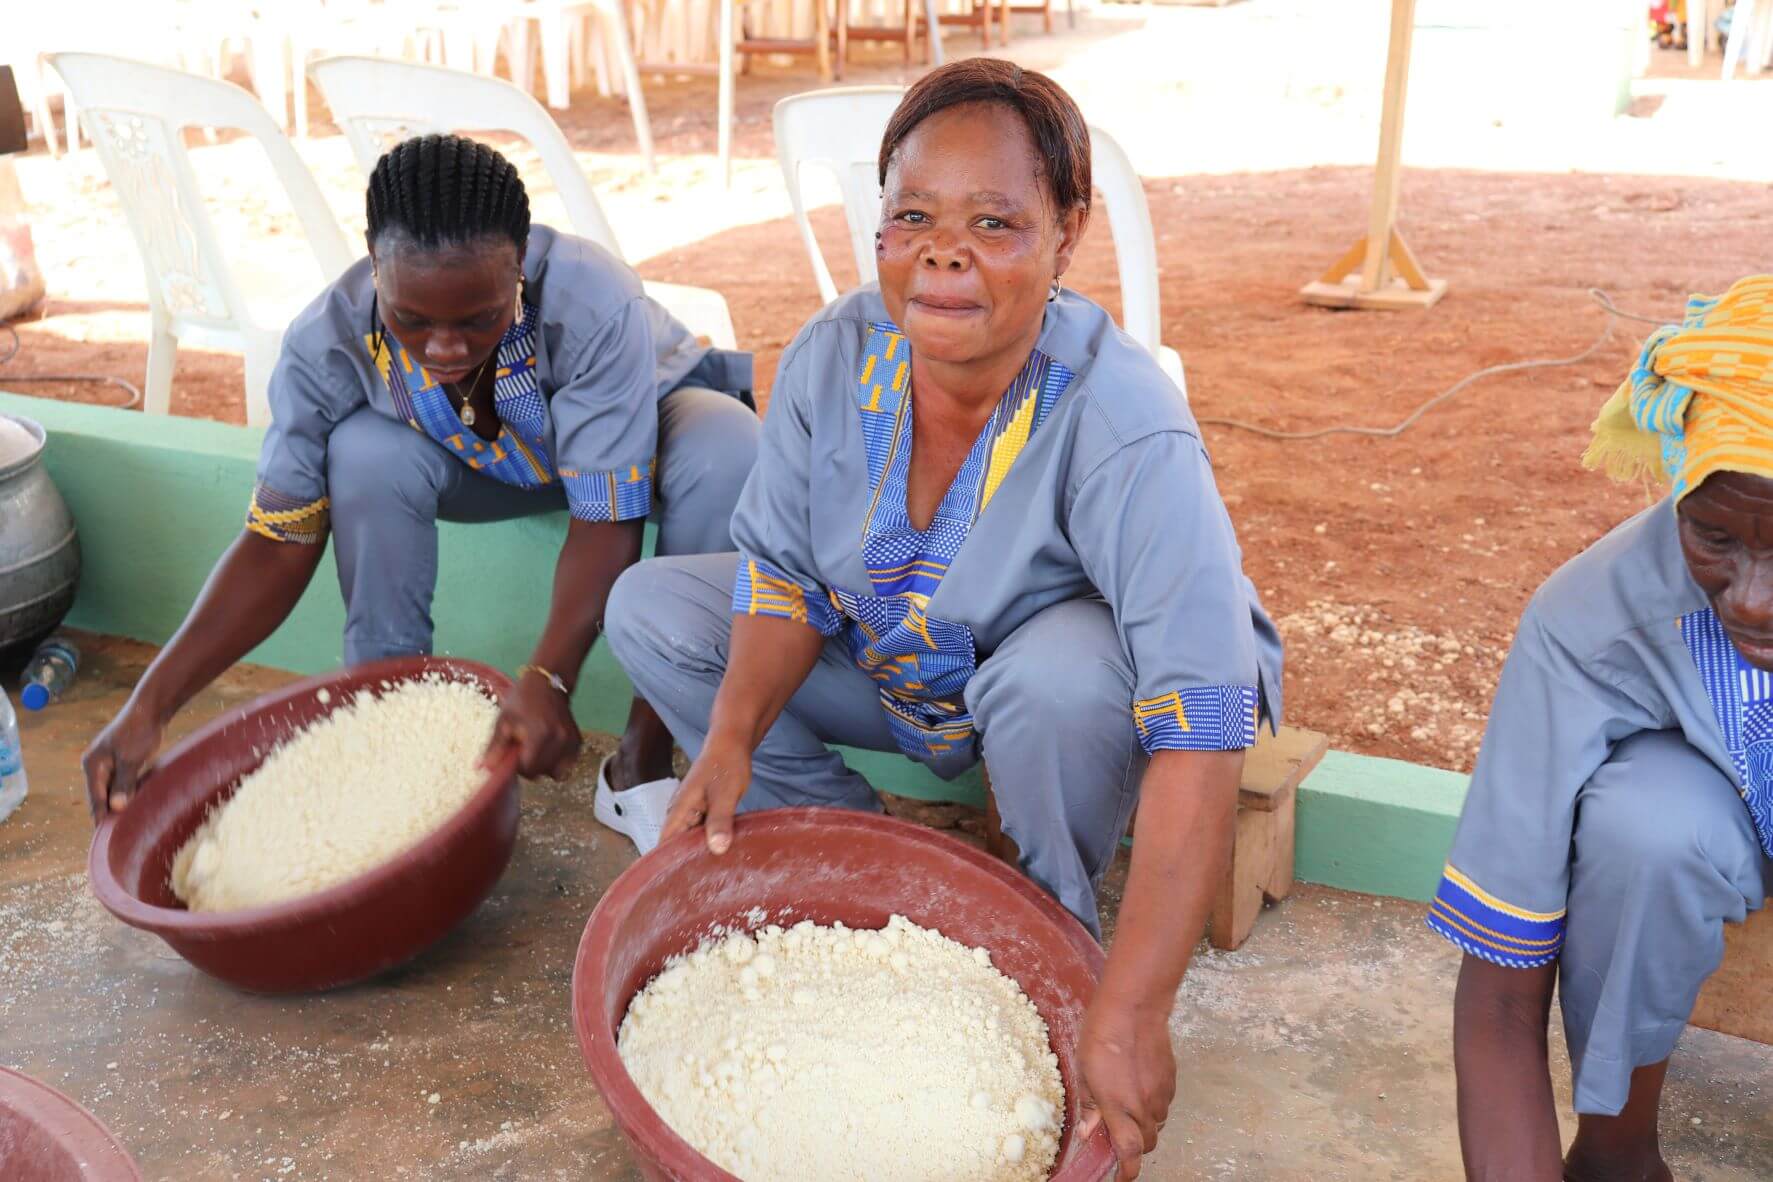 Fairtrade Africa and Ben & Jerry transform lives of women and youth in Agbengourou